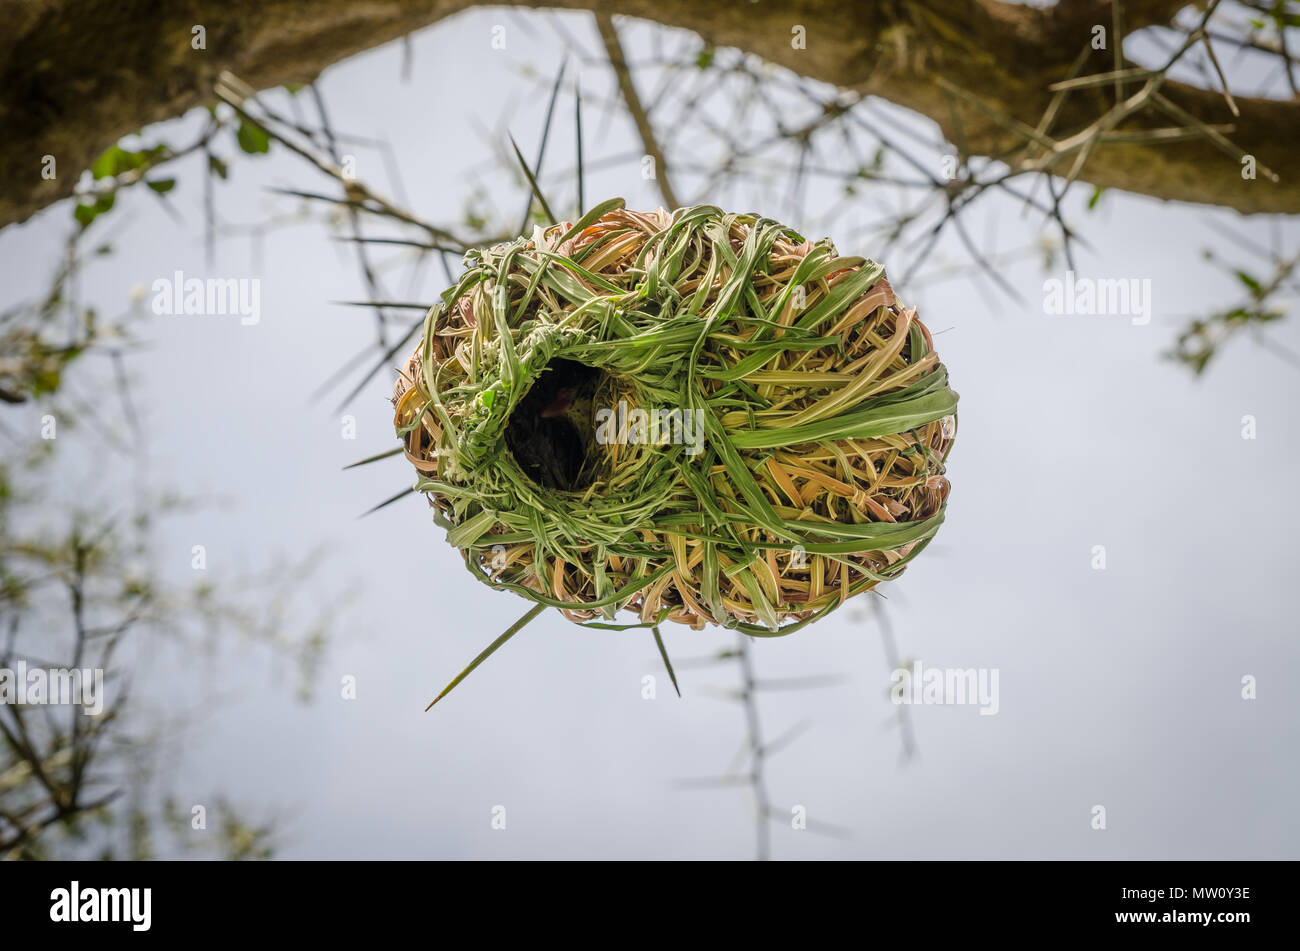 Elaborate African weaver bird nest hanging from thorny tree in Senegal, Africa. Stock Photo